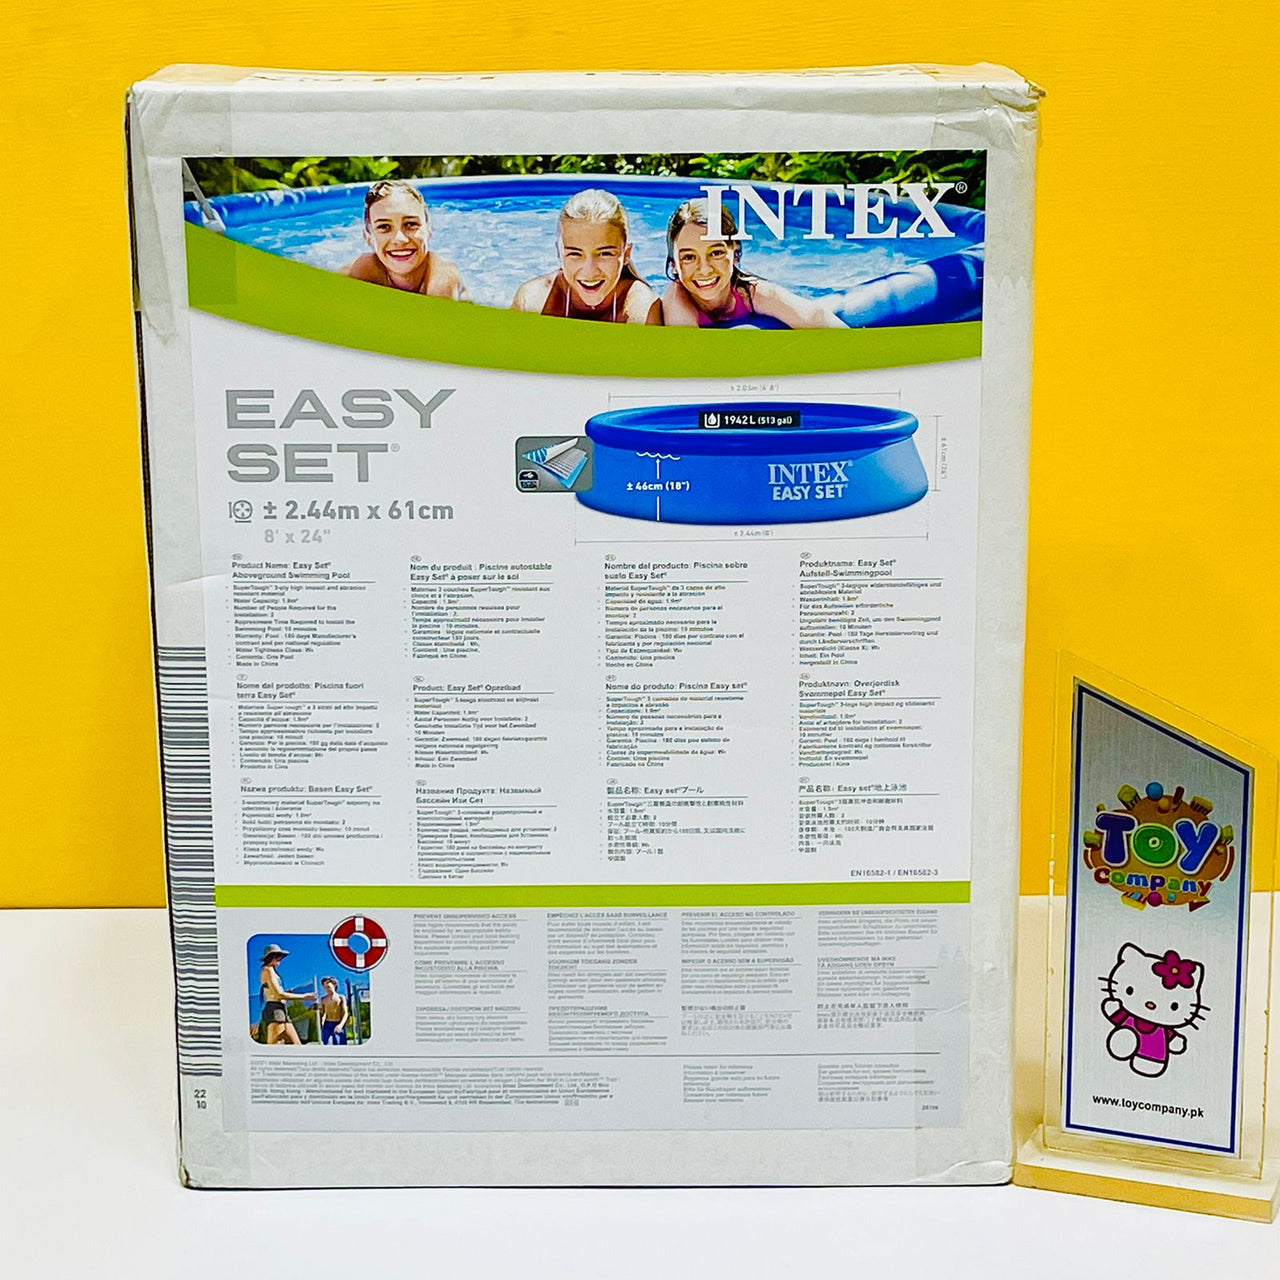 Intex Puncture Resistant Family Pool 8ft x 24in